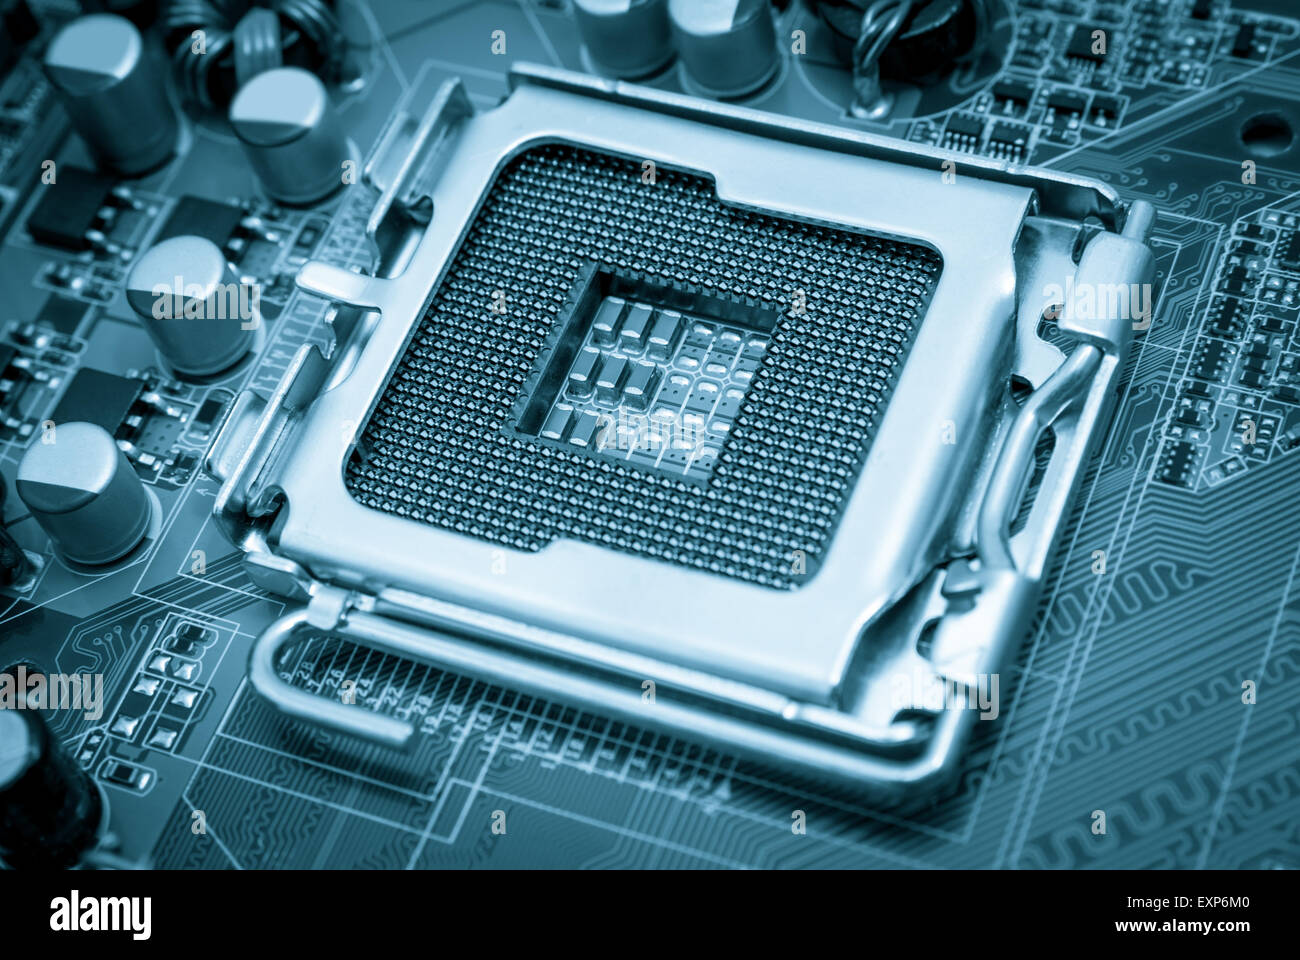 Empty CPU processor socket with pins on motherboard toned blue Stock Photo